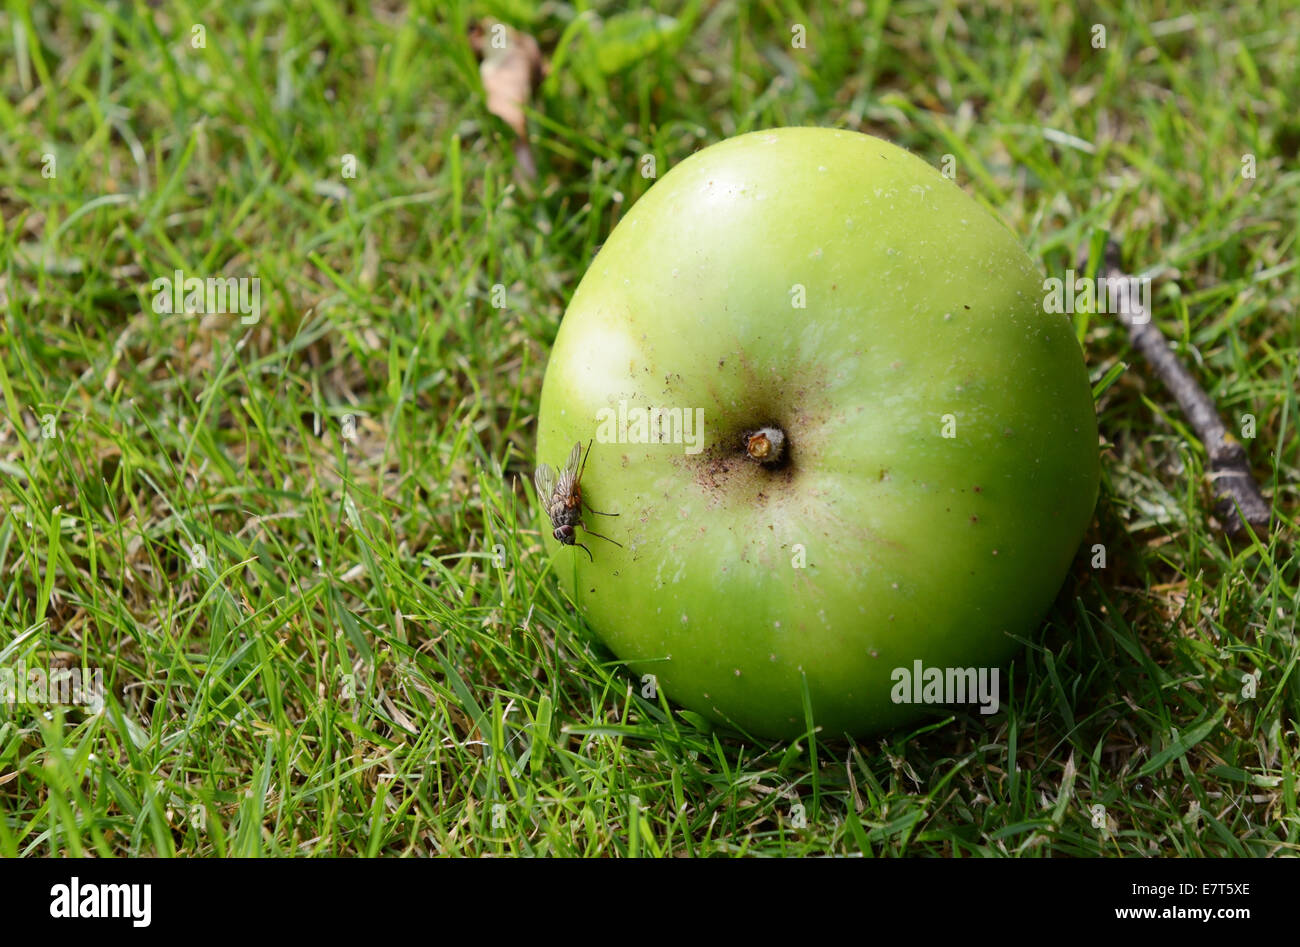 Flesh fly on a windfall apple lying on green grass Stock Photo